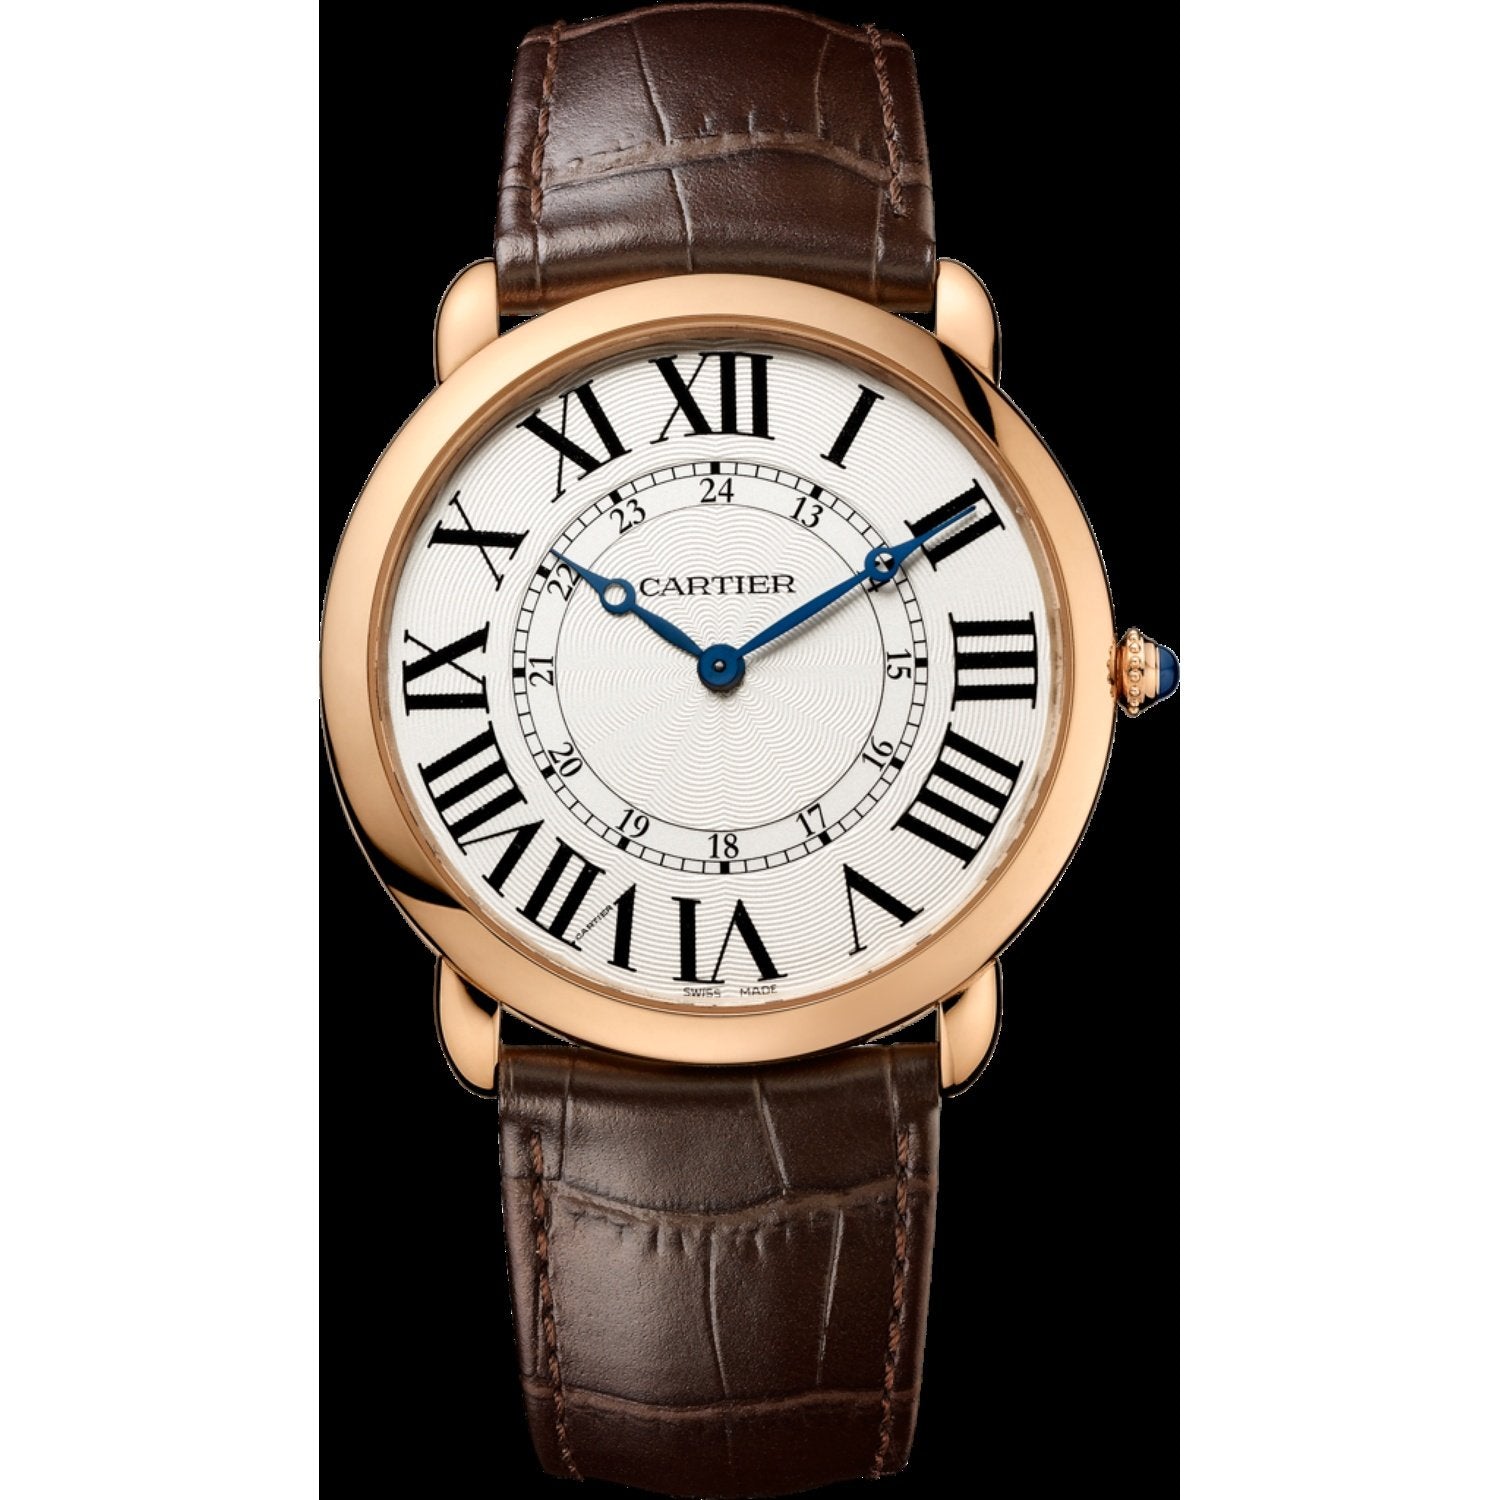 Men's Cartier Watches from $3,600 | Lyst